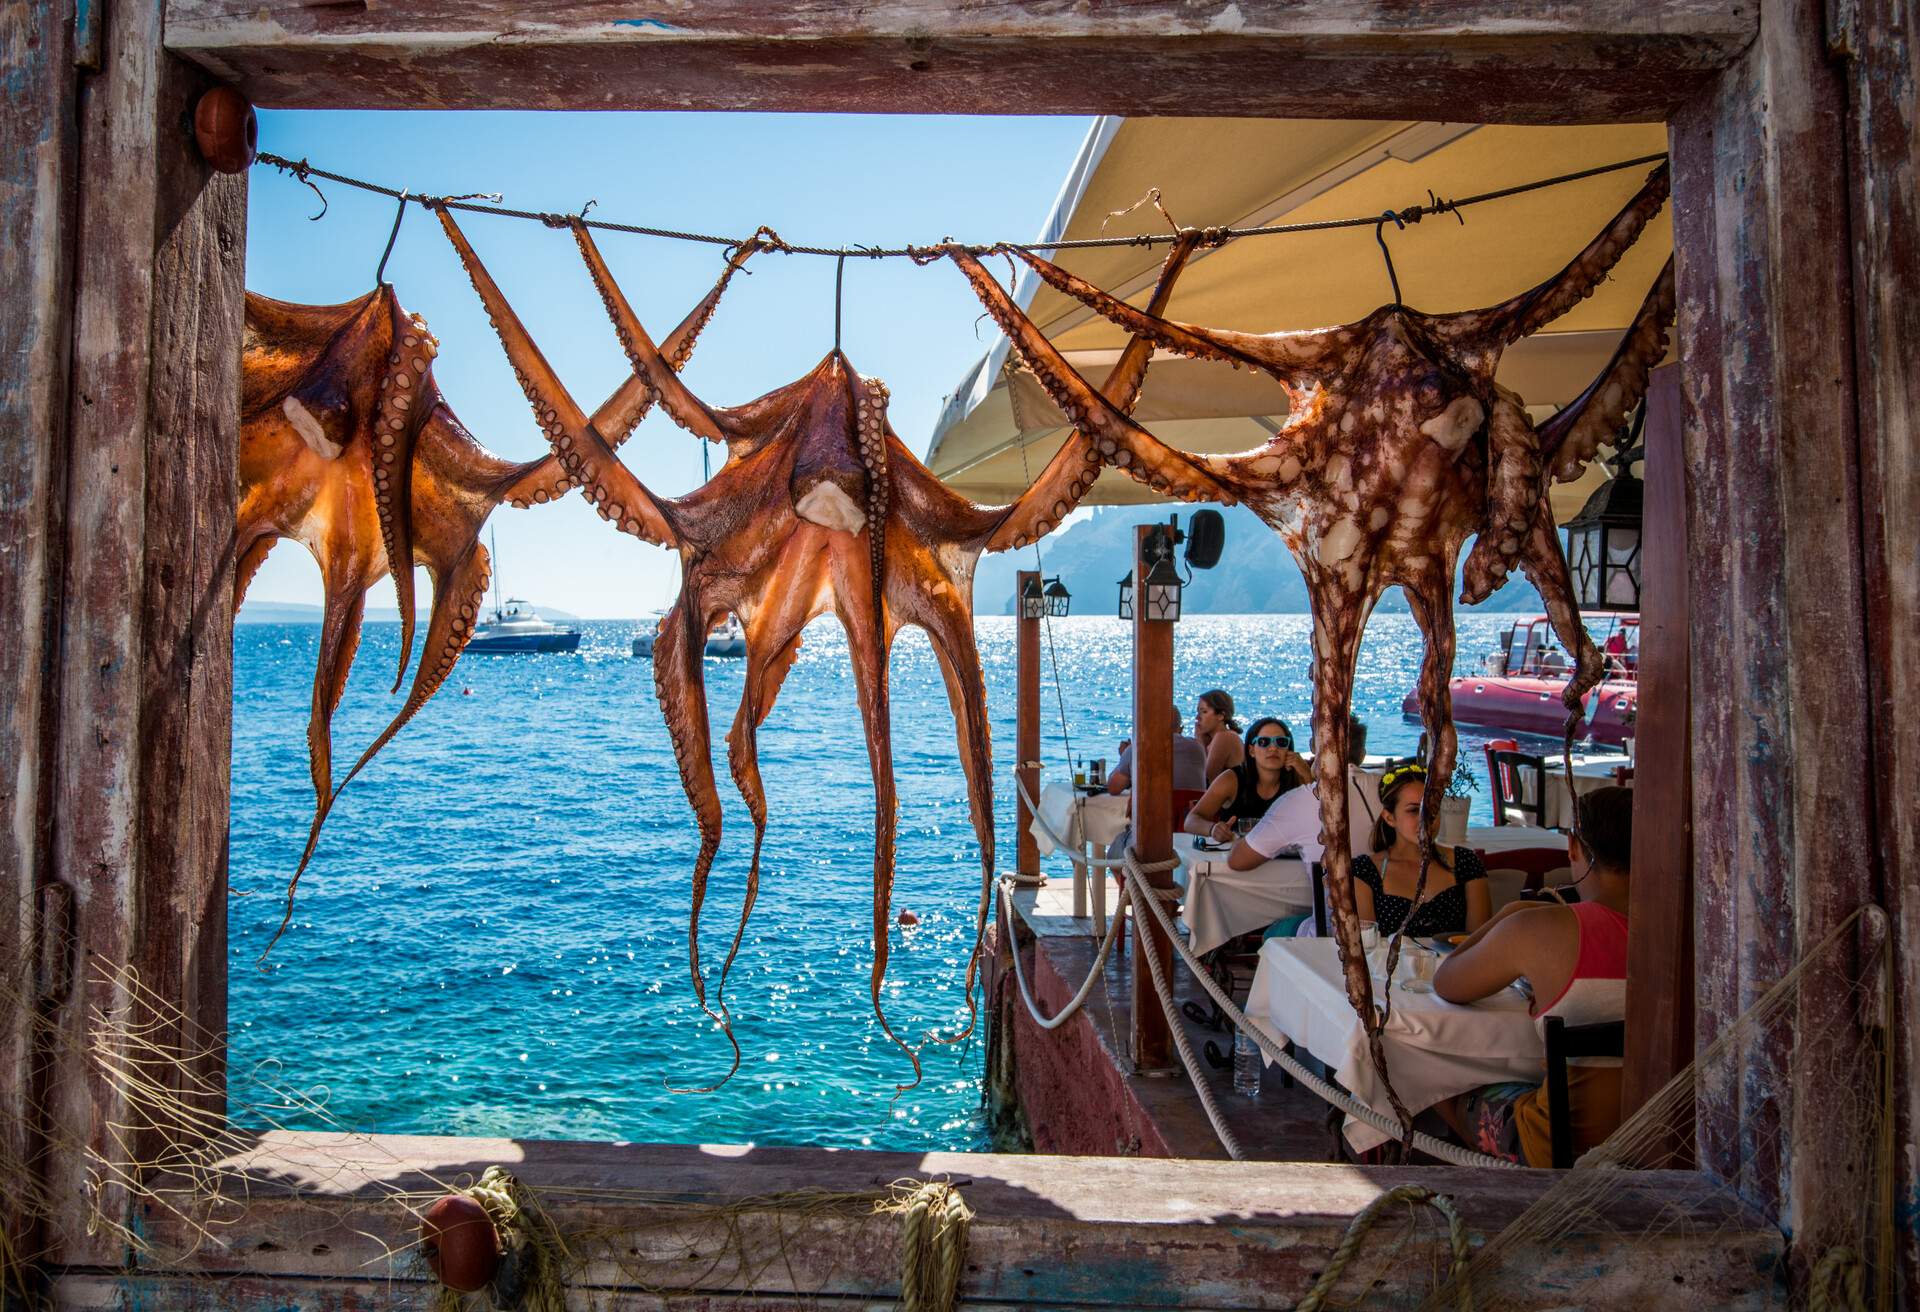 Octopus on display at the restaurant down by the Ammoudi bay port in Santorini